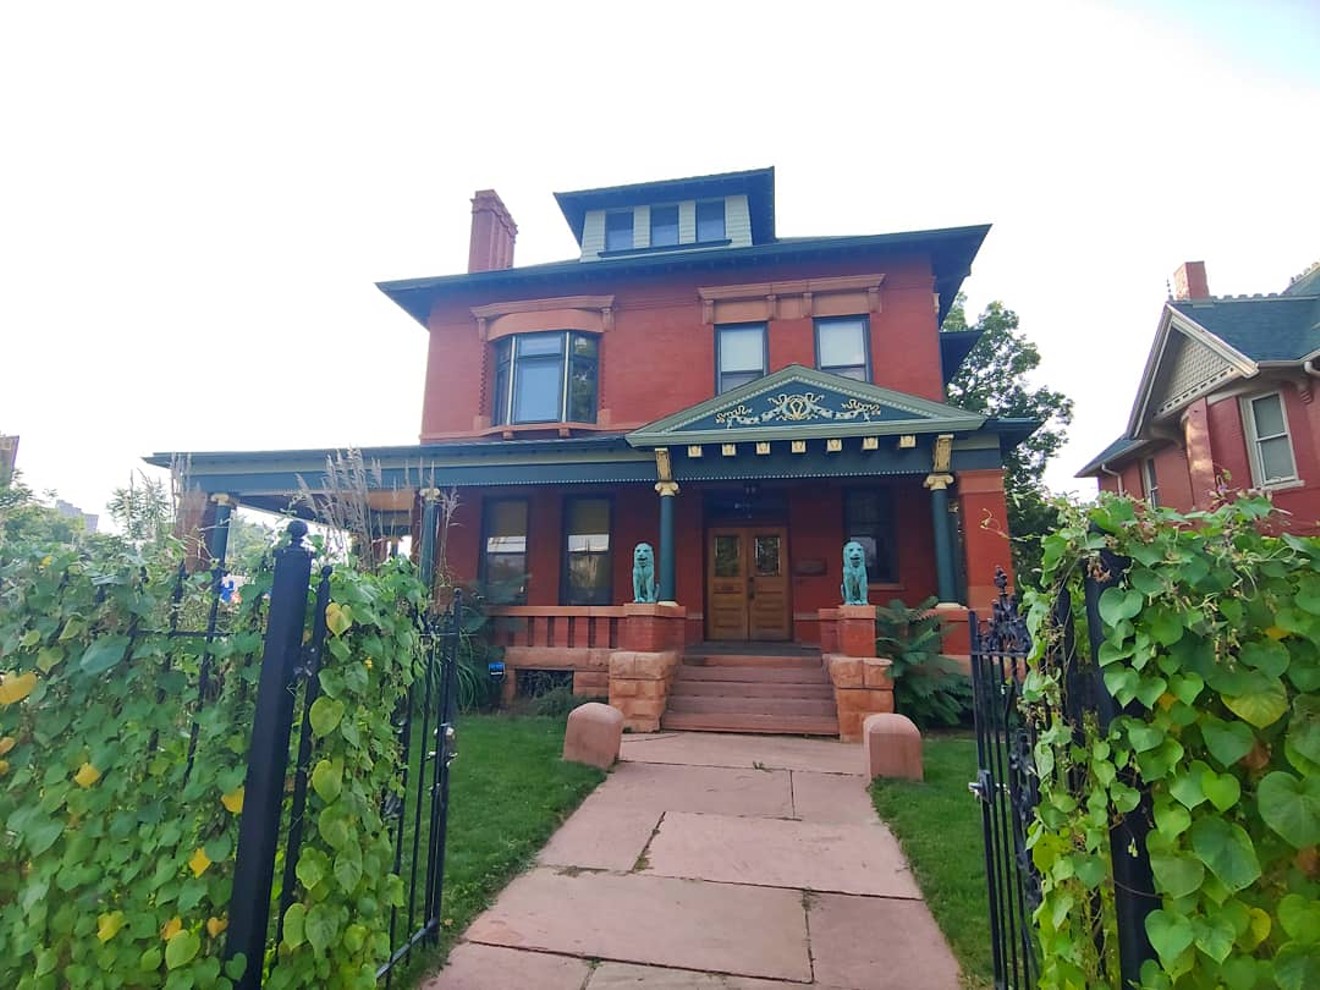 The Milheim house has a long and storied history in Denver.